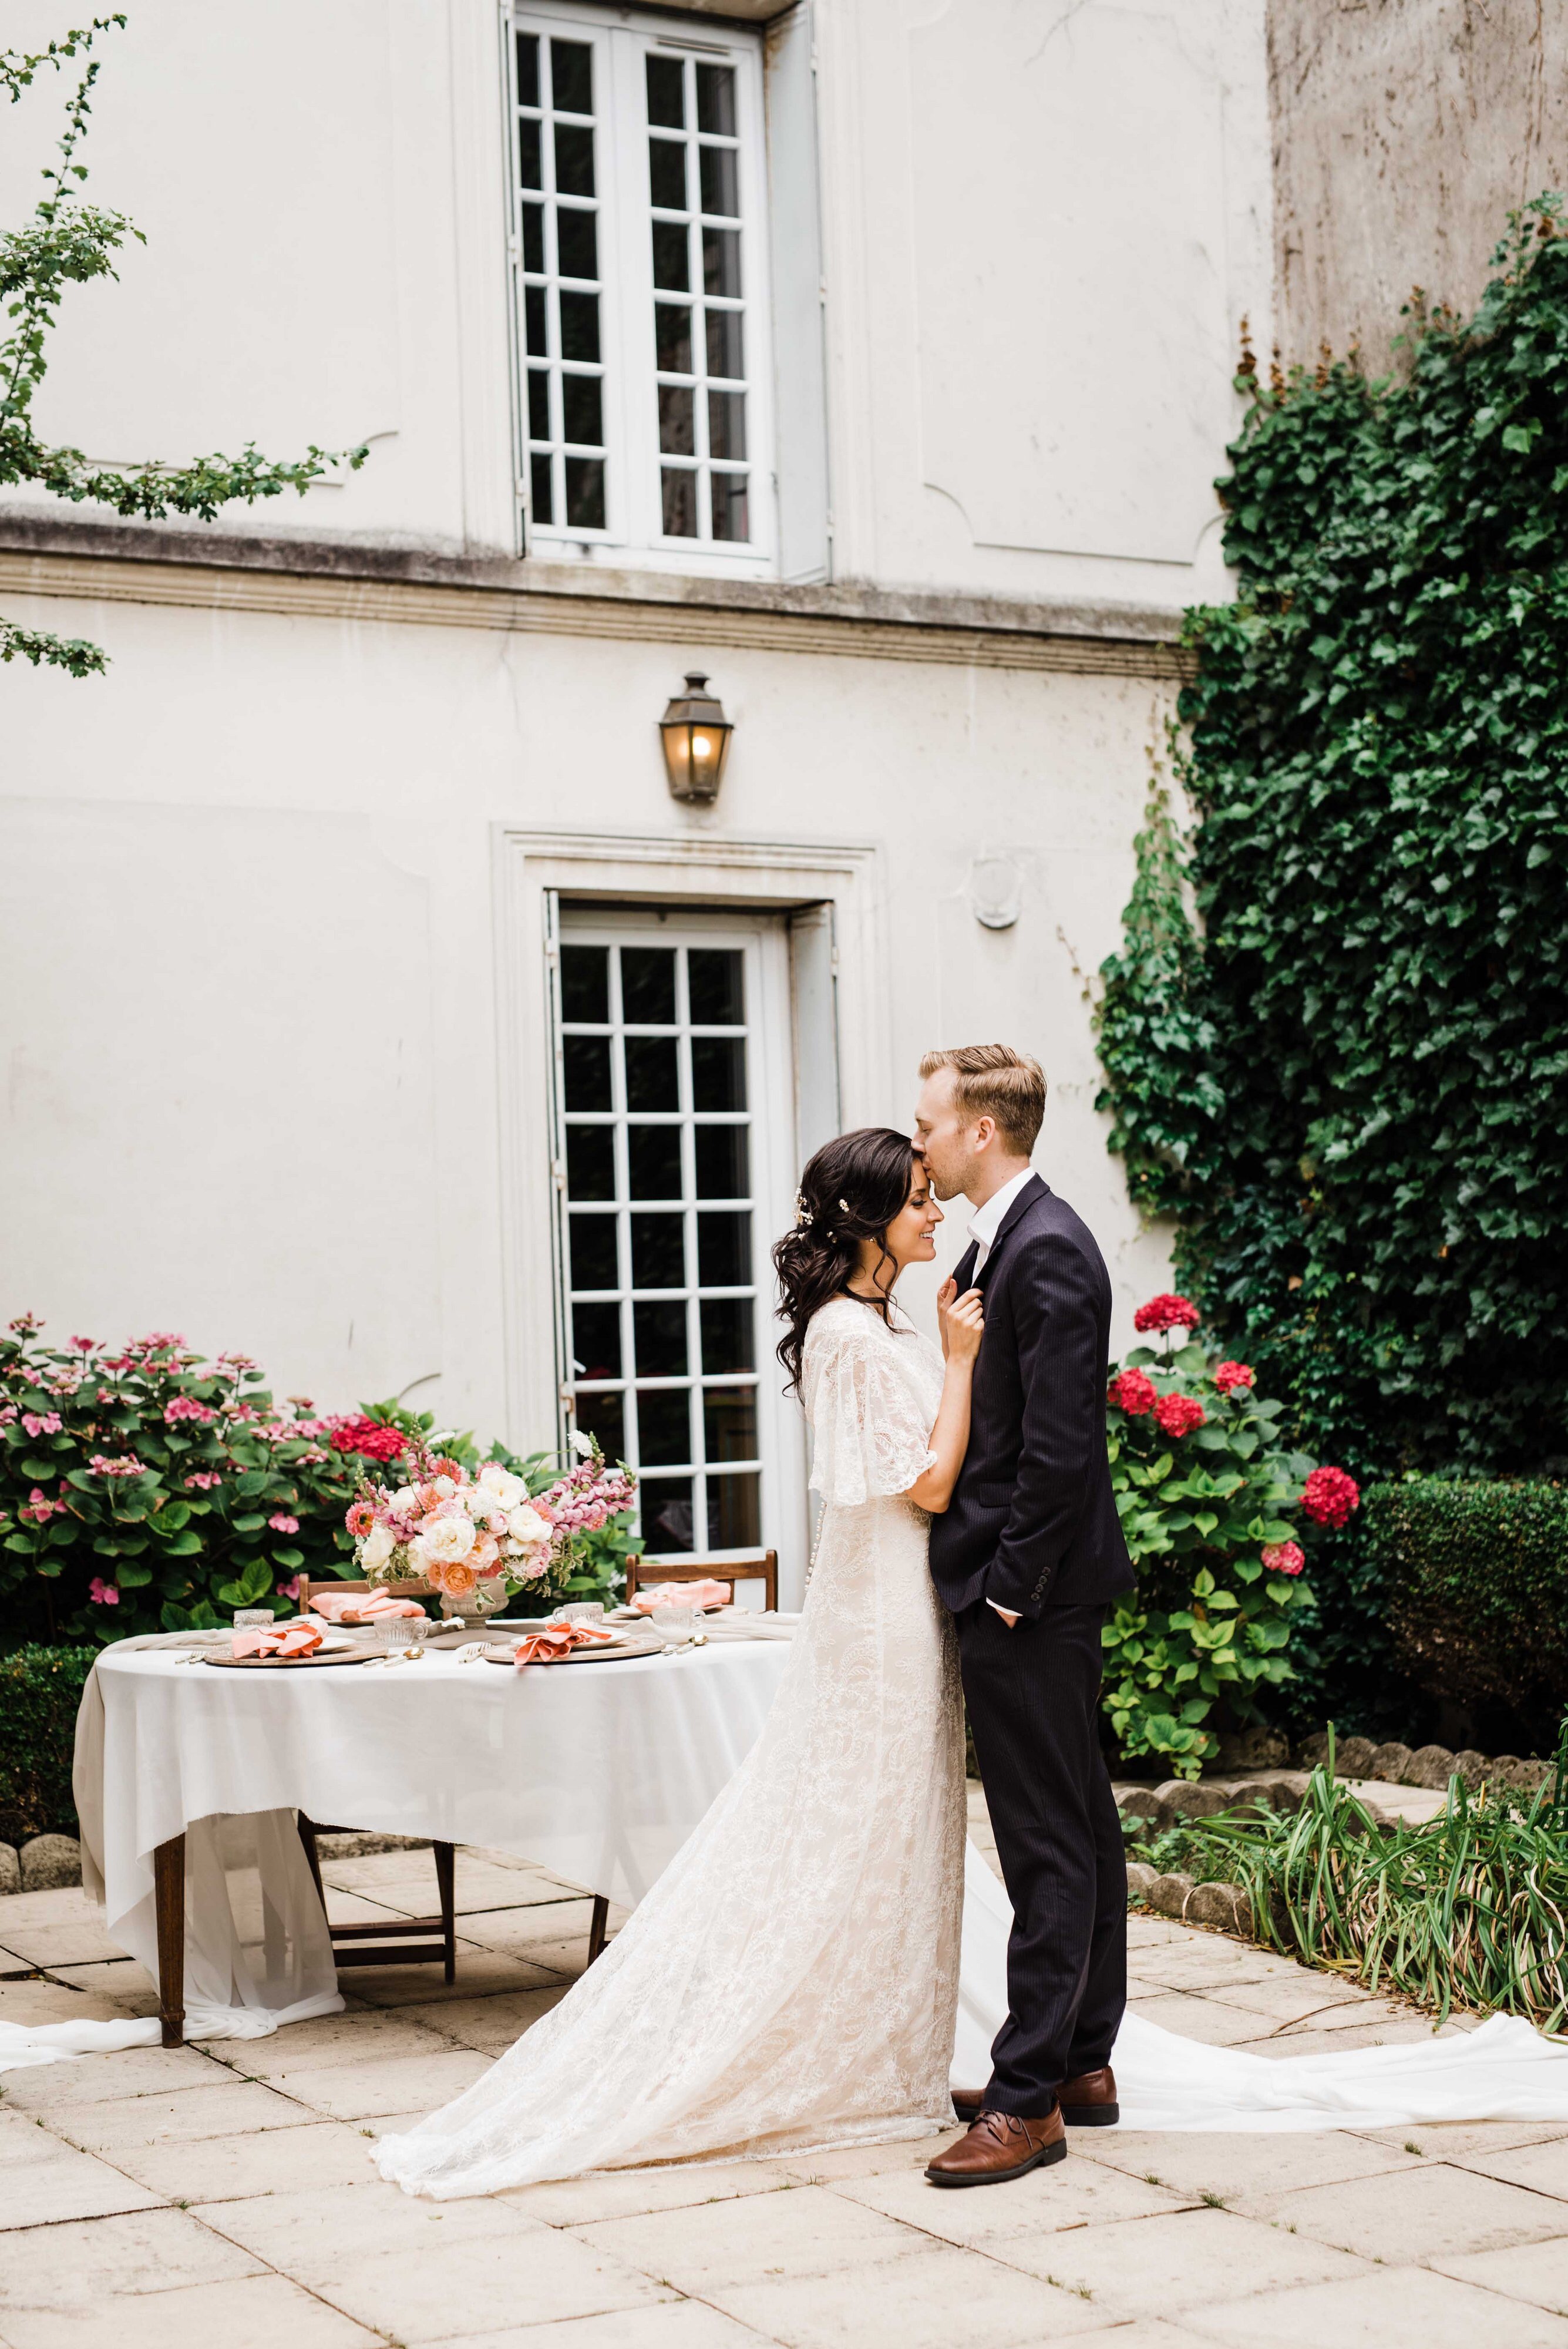 2017 Couple gets married in France on an elegant private estate.